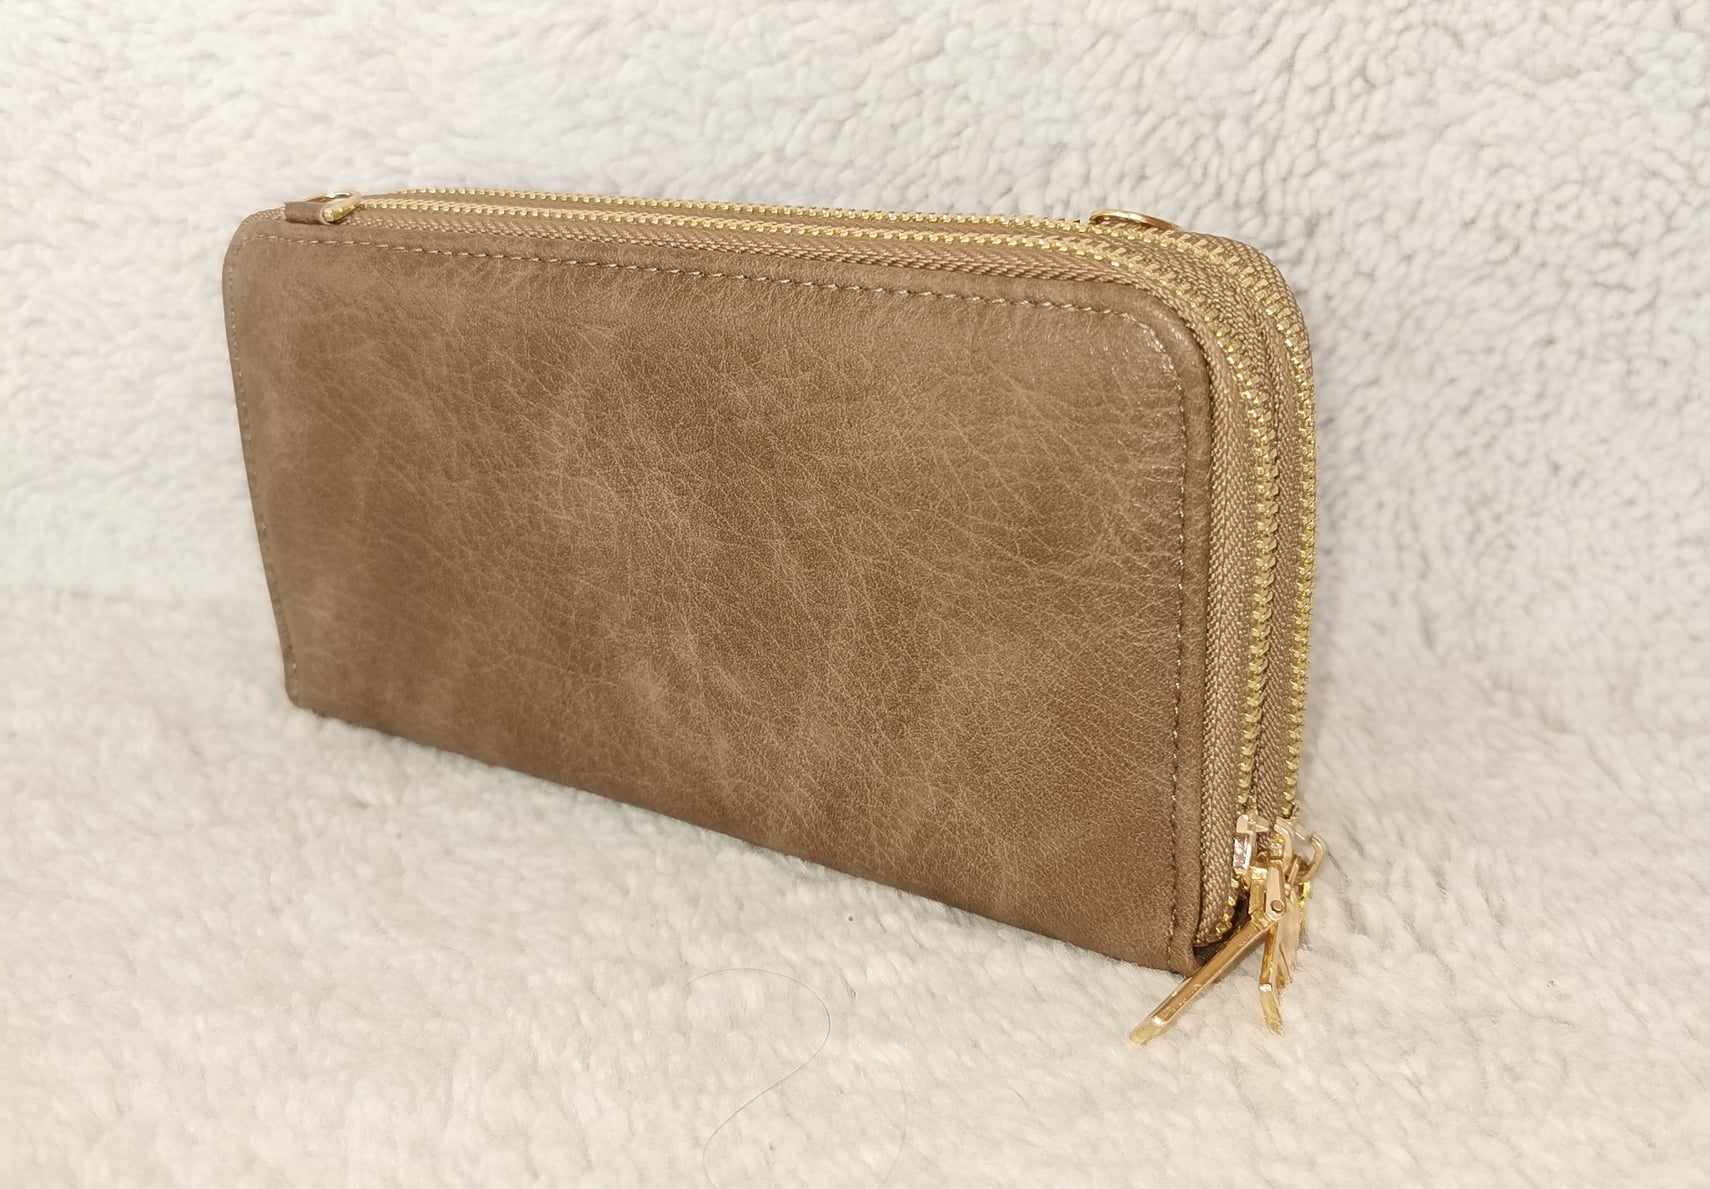 WALLET ITALY 23/24 ΜΟΝΟC. WITH DOUBLE ZIPPER